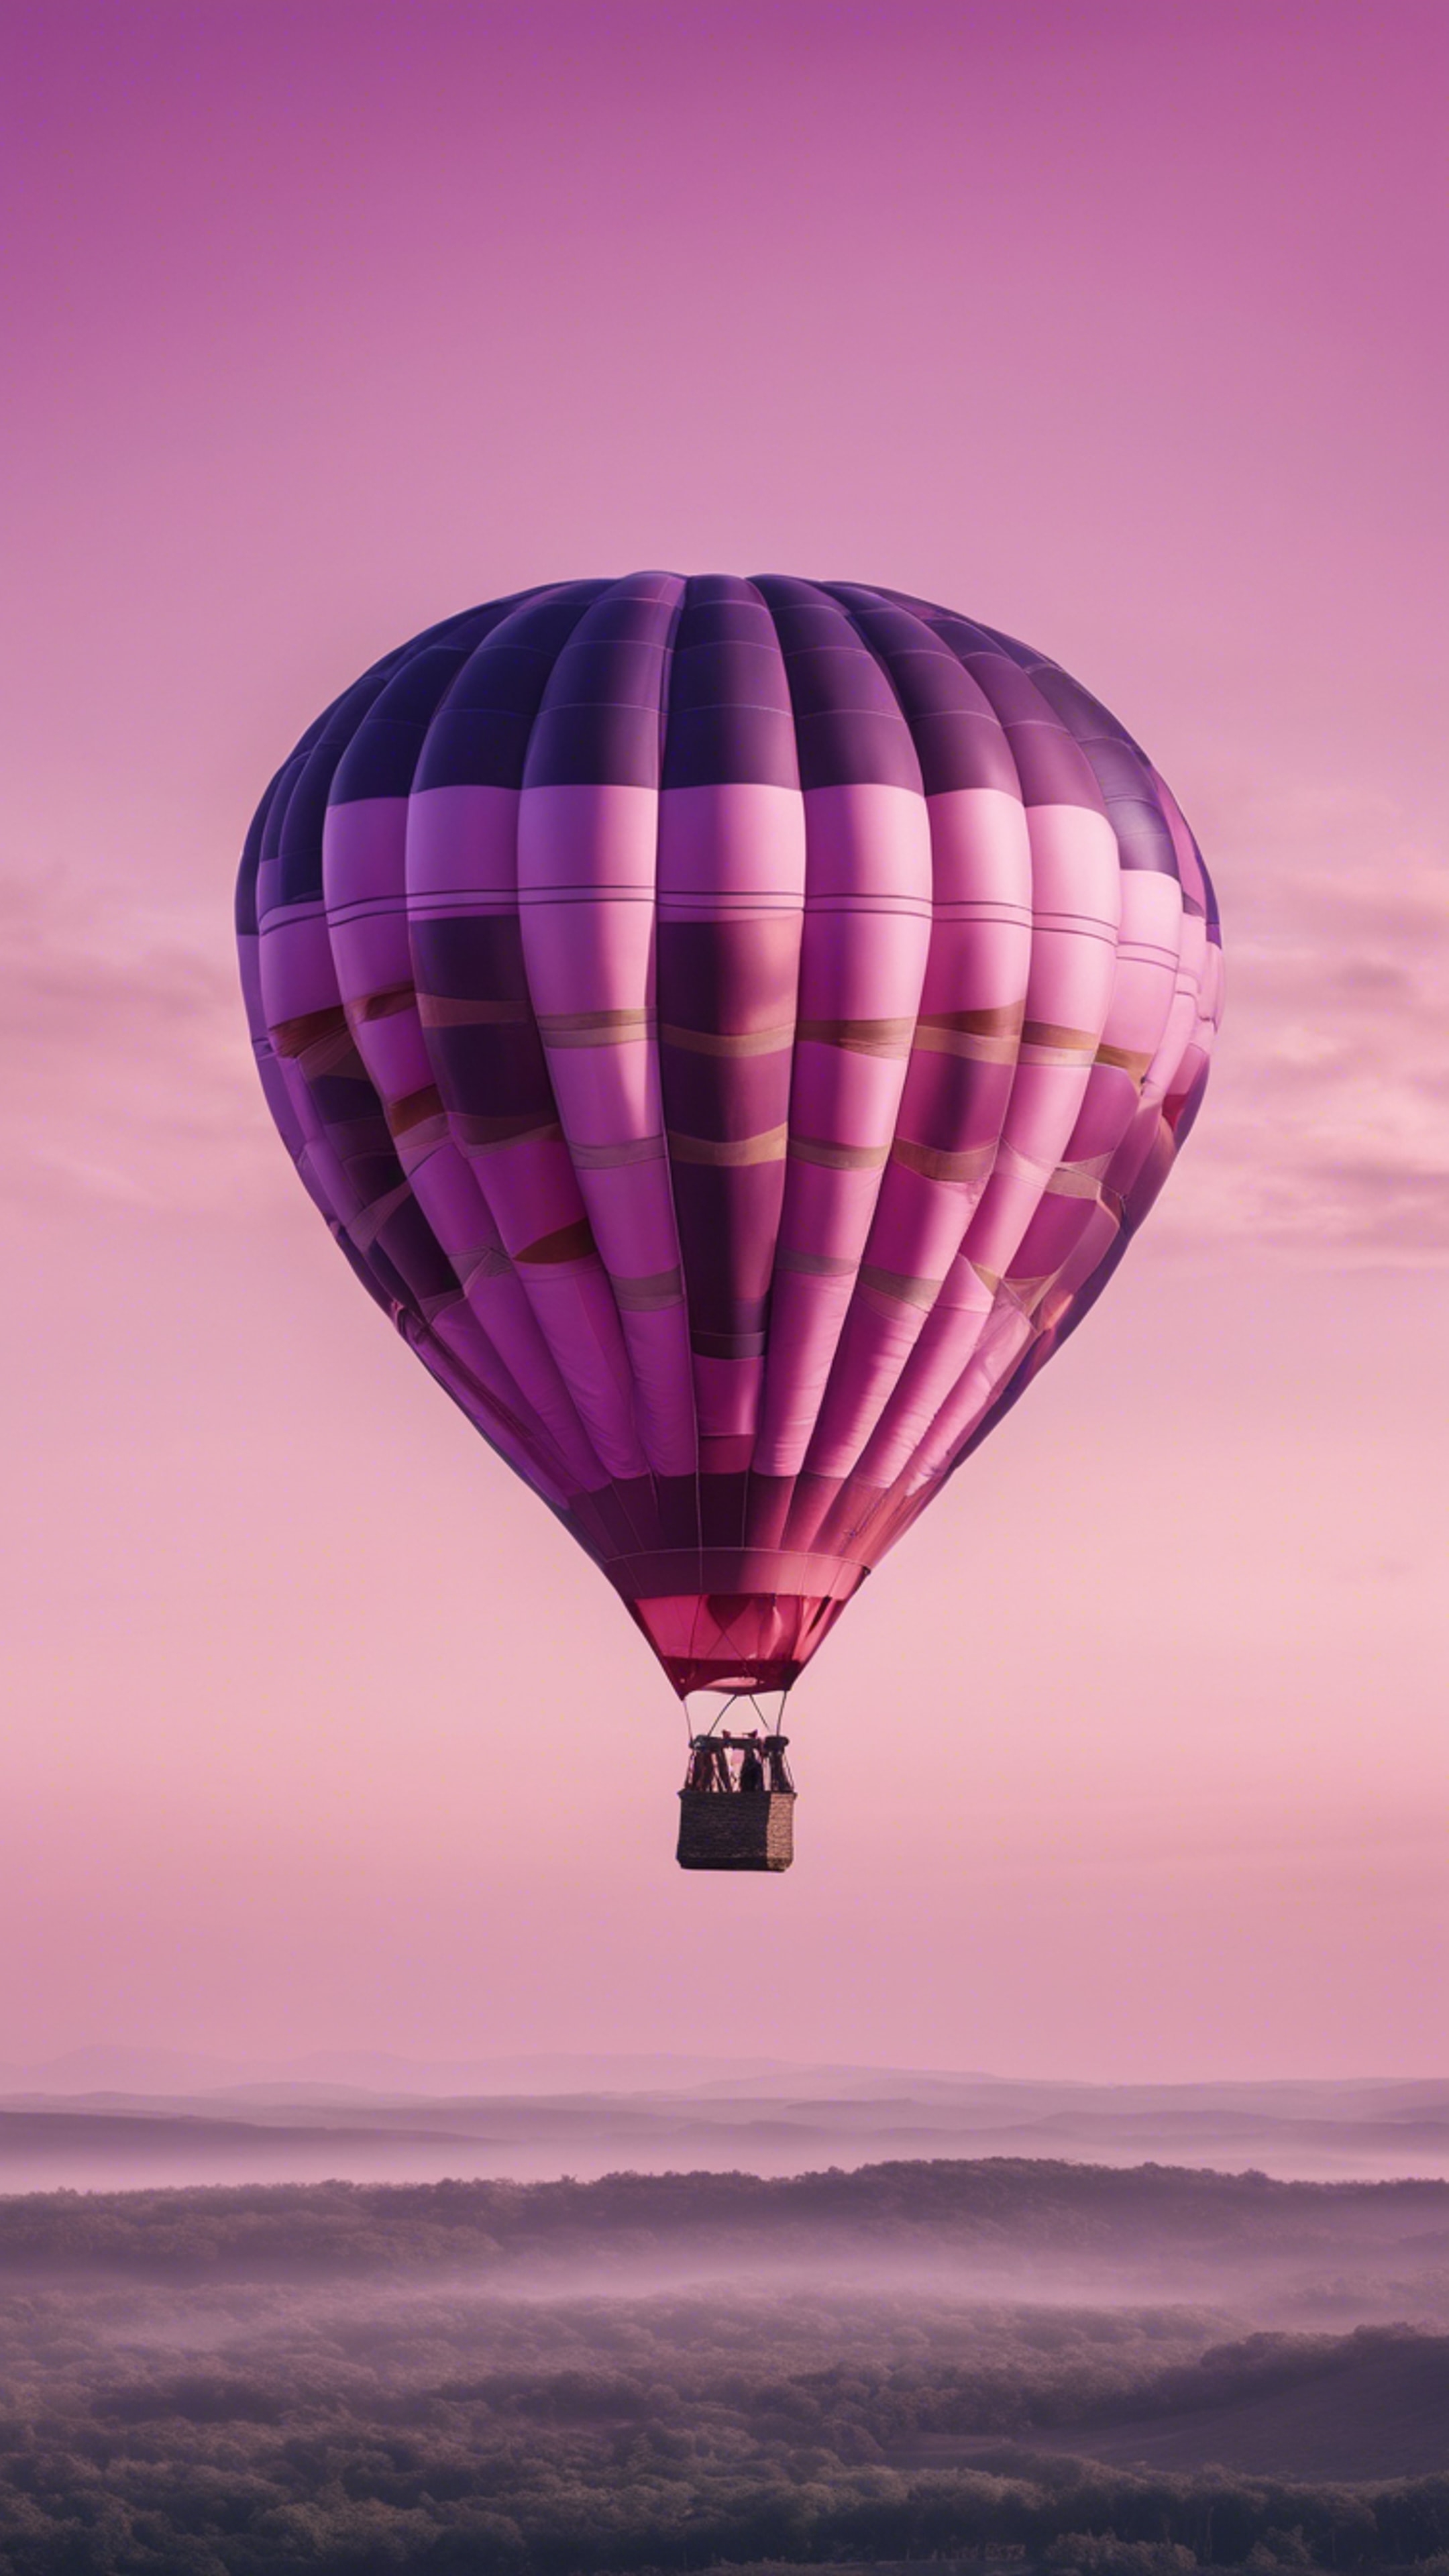 A pink and purple striped hot air balloon floating in a clear morning sky. Behang[24bb758d911f4cfb8c8f]